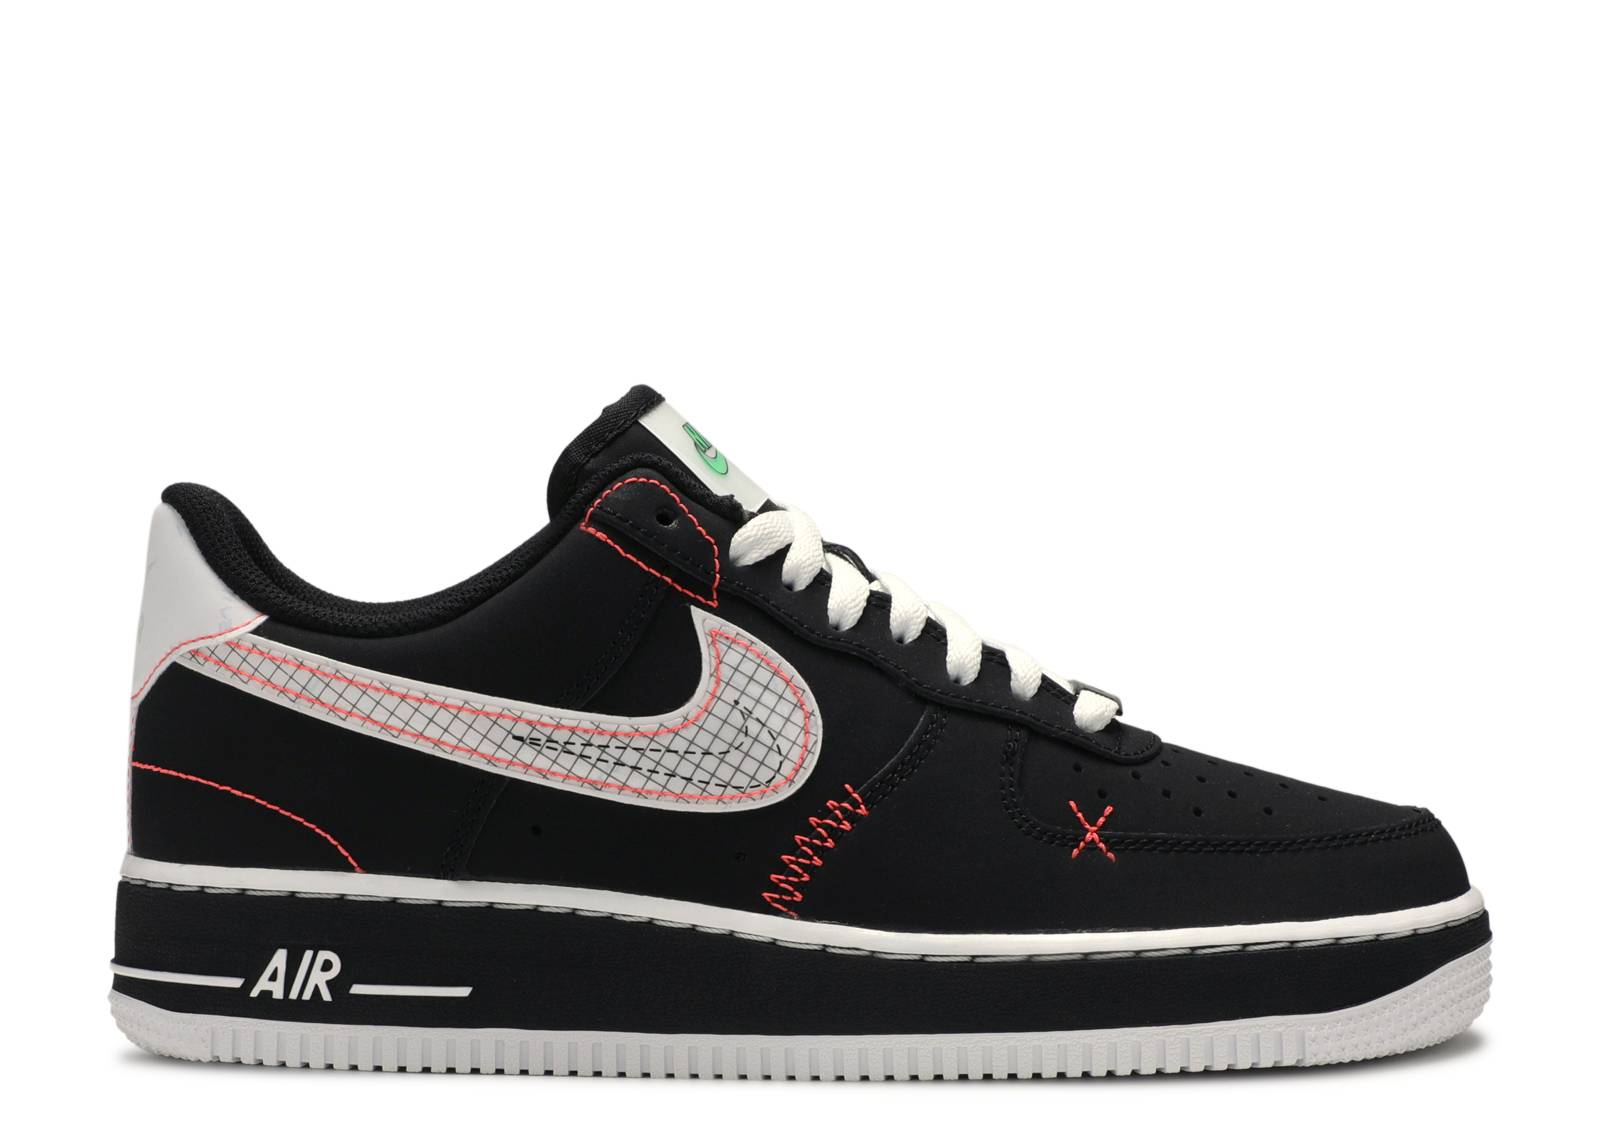 Air Force 1 '07 LV8 'Exposed Stitching'